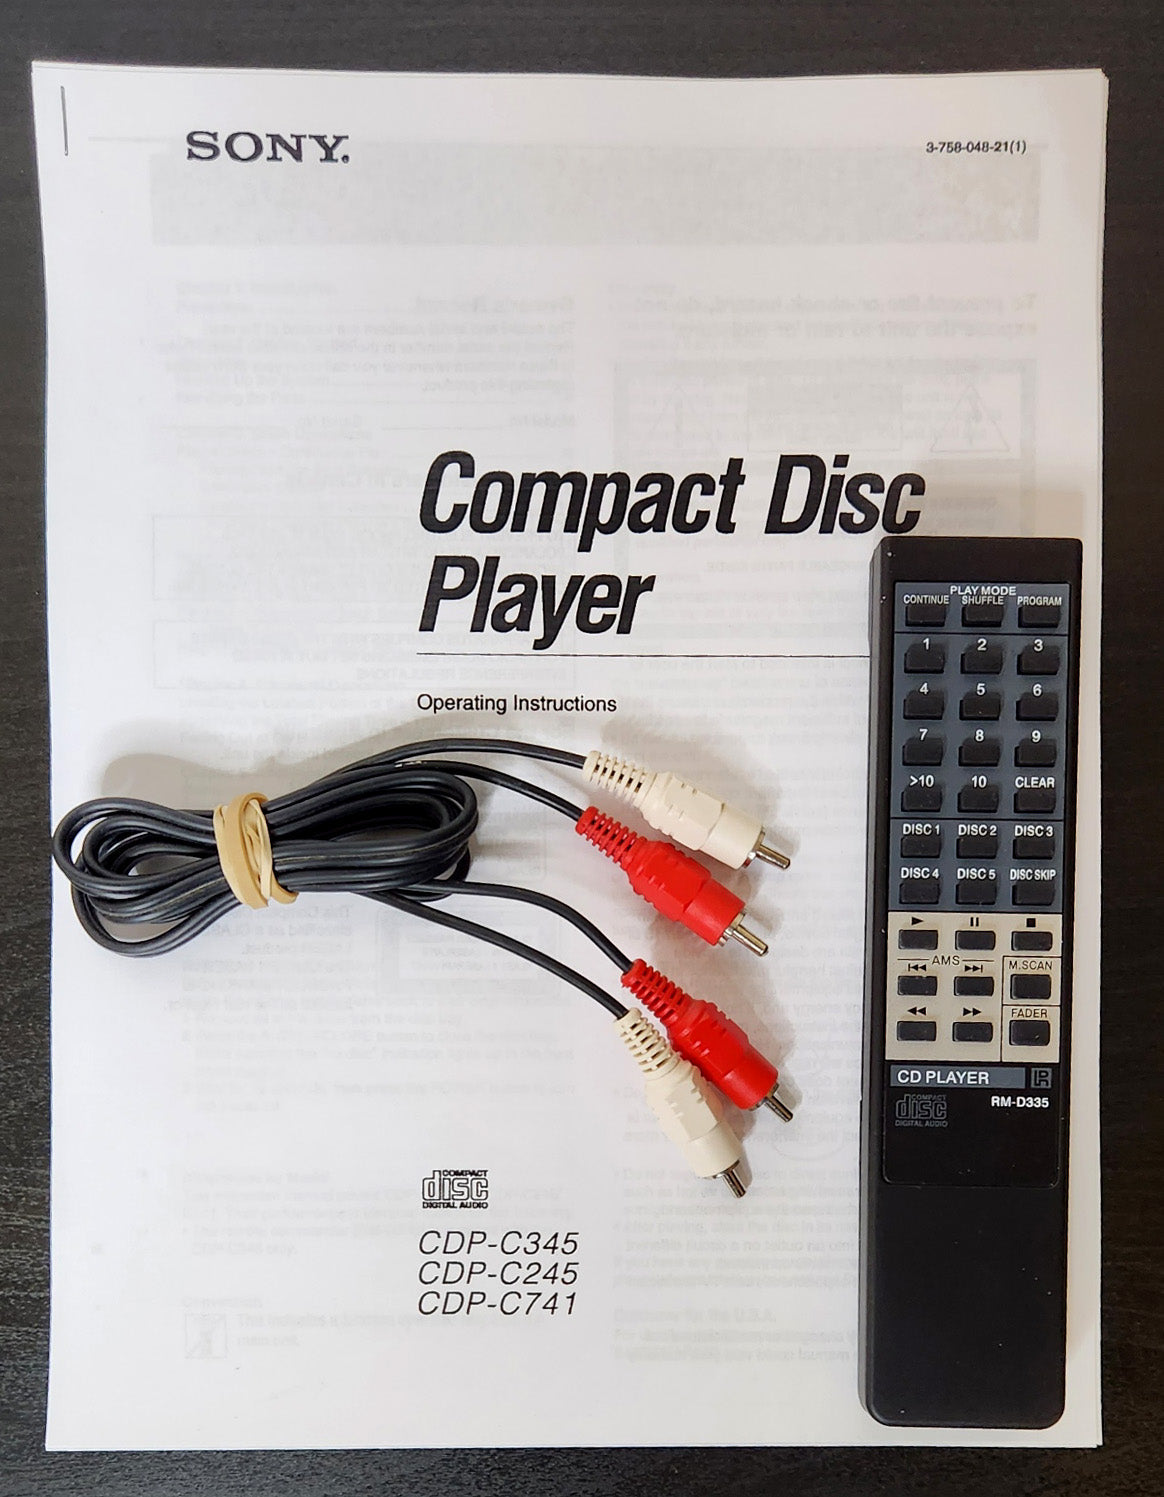 Sony CDP-C245 5-Disc Carousel CD Changer - Remote Control, Cables, Manual